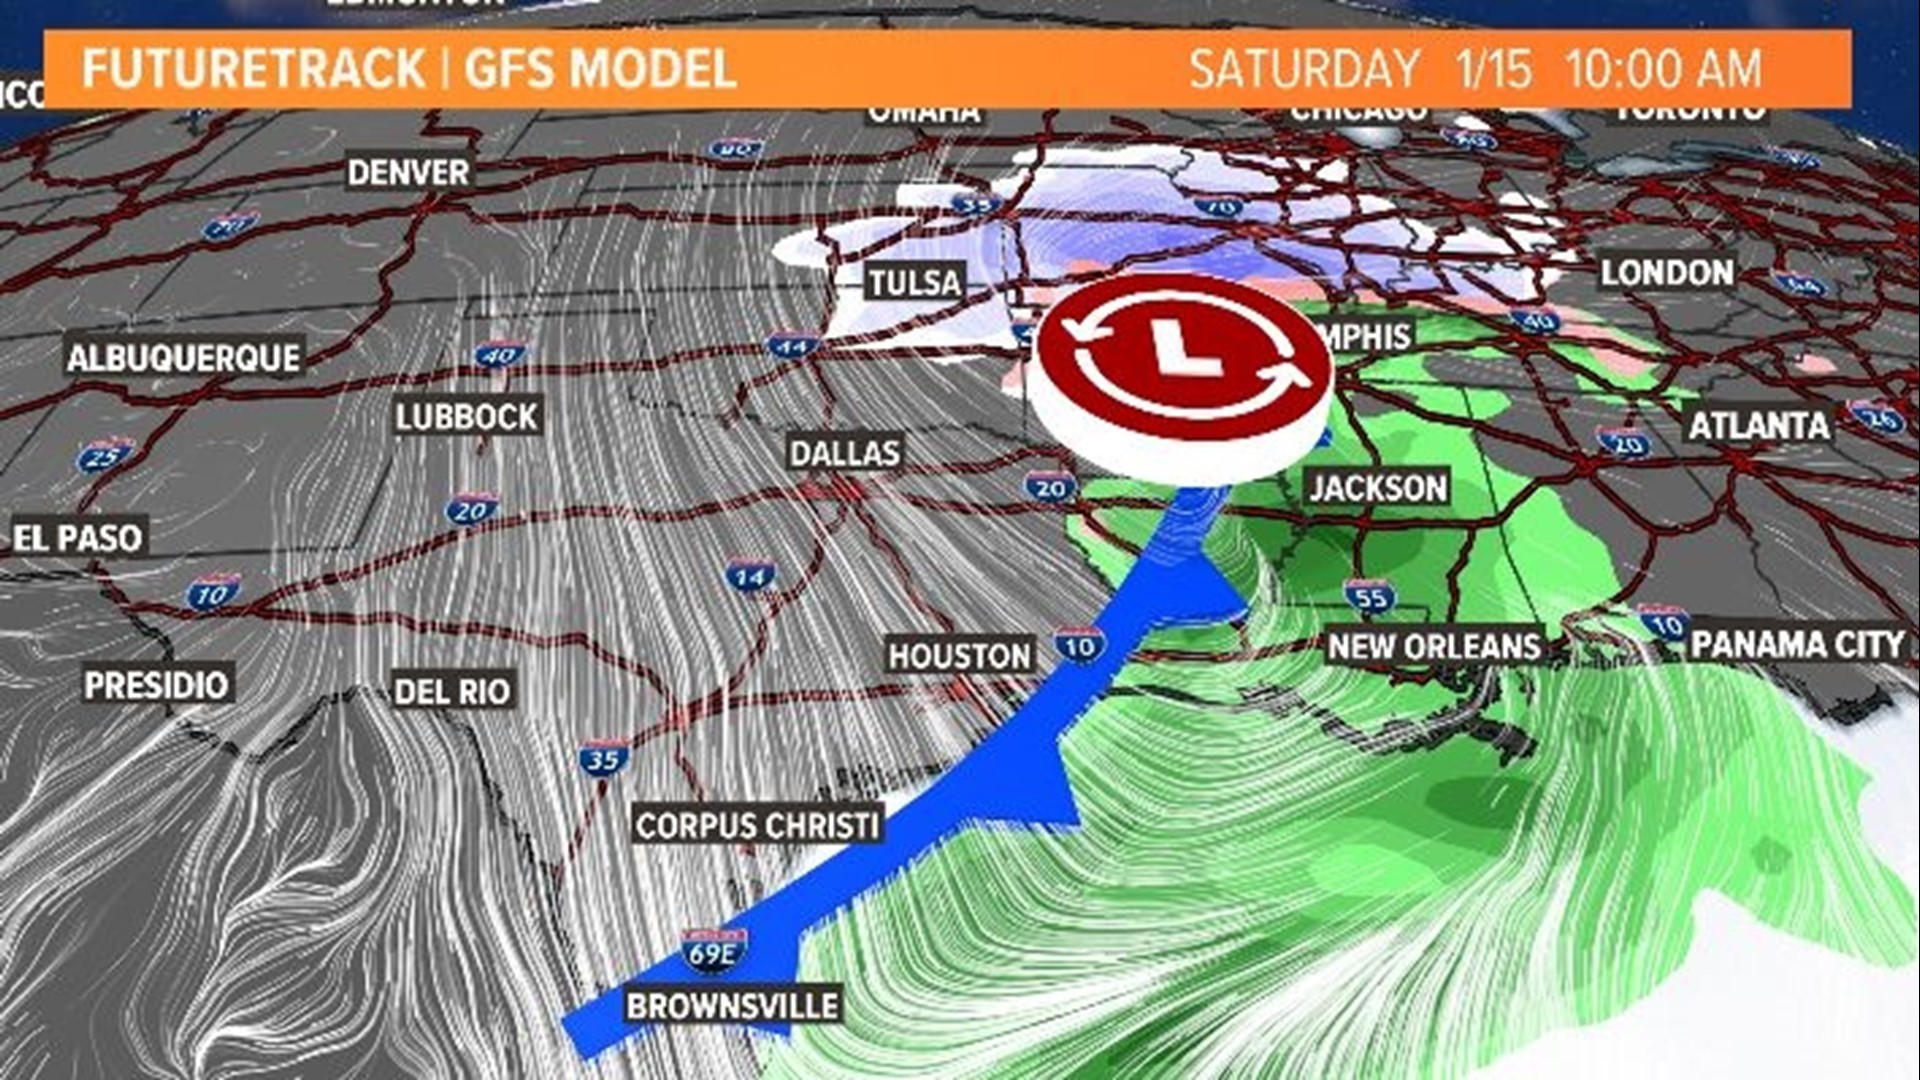 Cold front coming to Houston Saturday, January 15